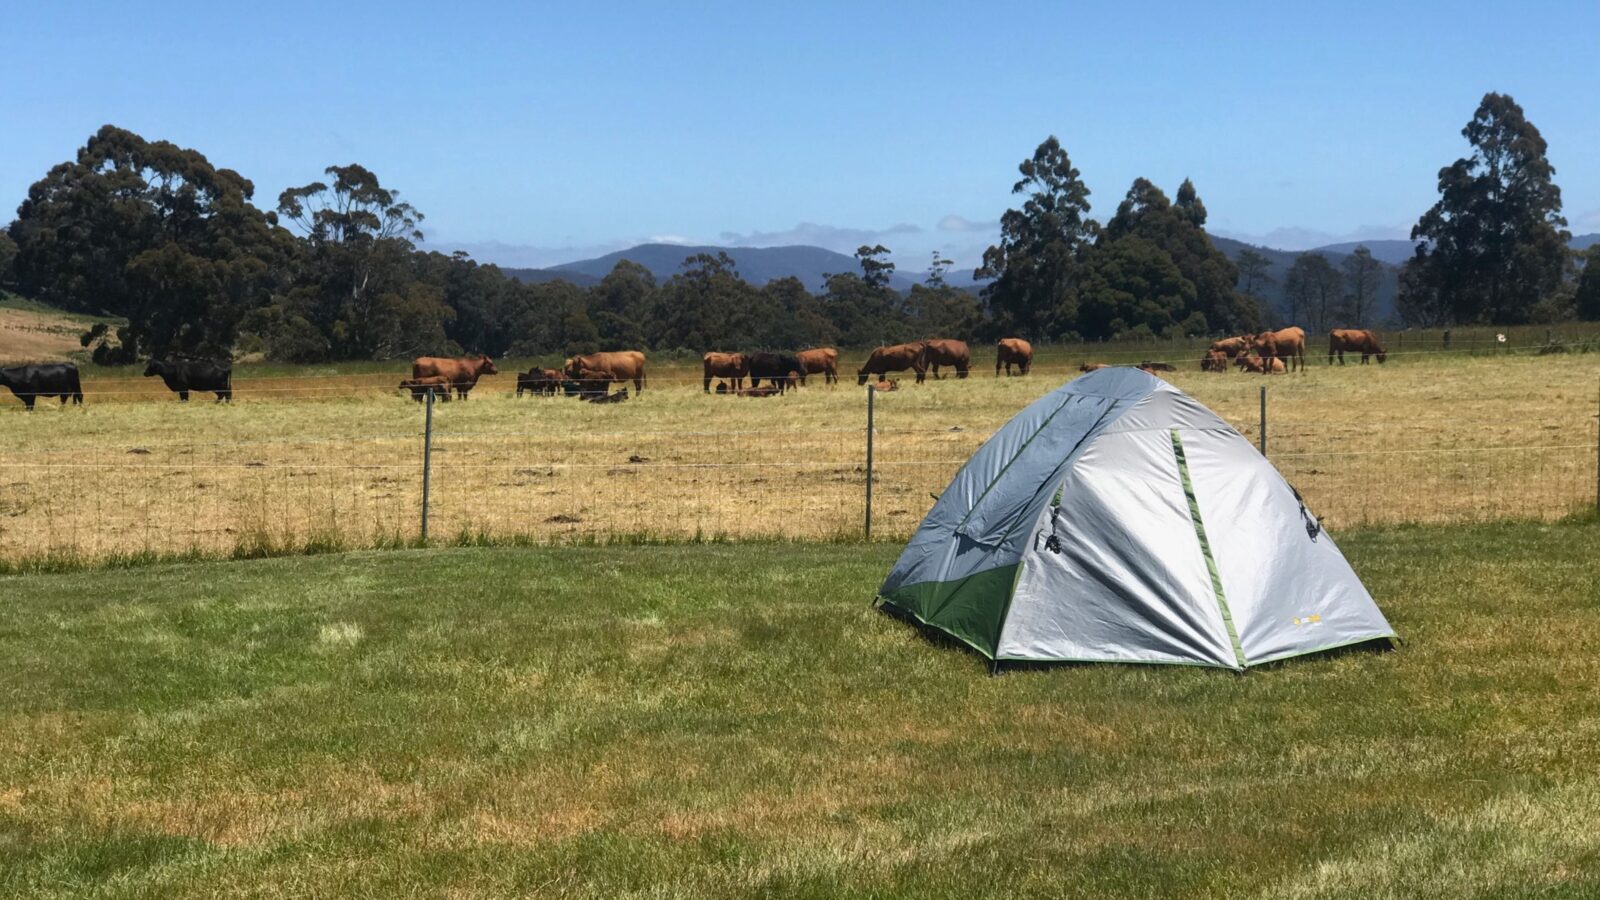 On Farm camping close to Cradle Mountain at The Farm Cradle Country Camp Ground.